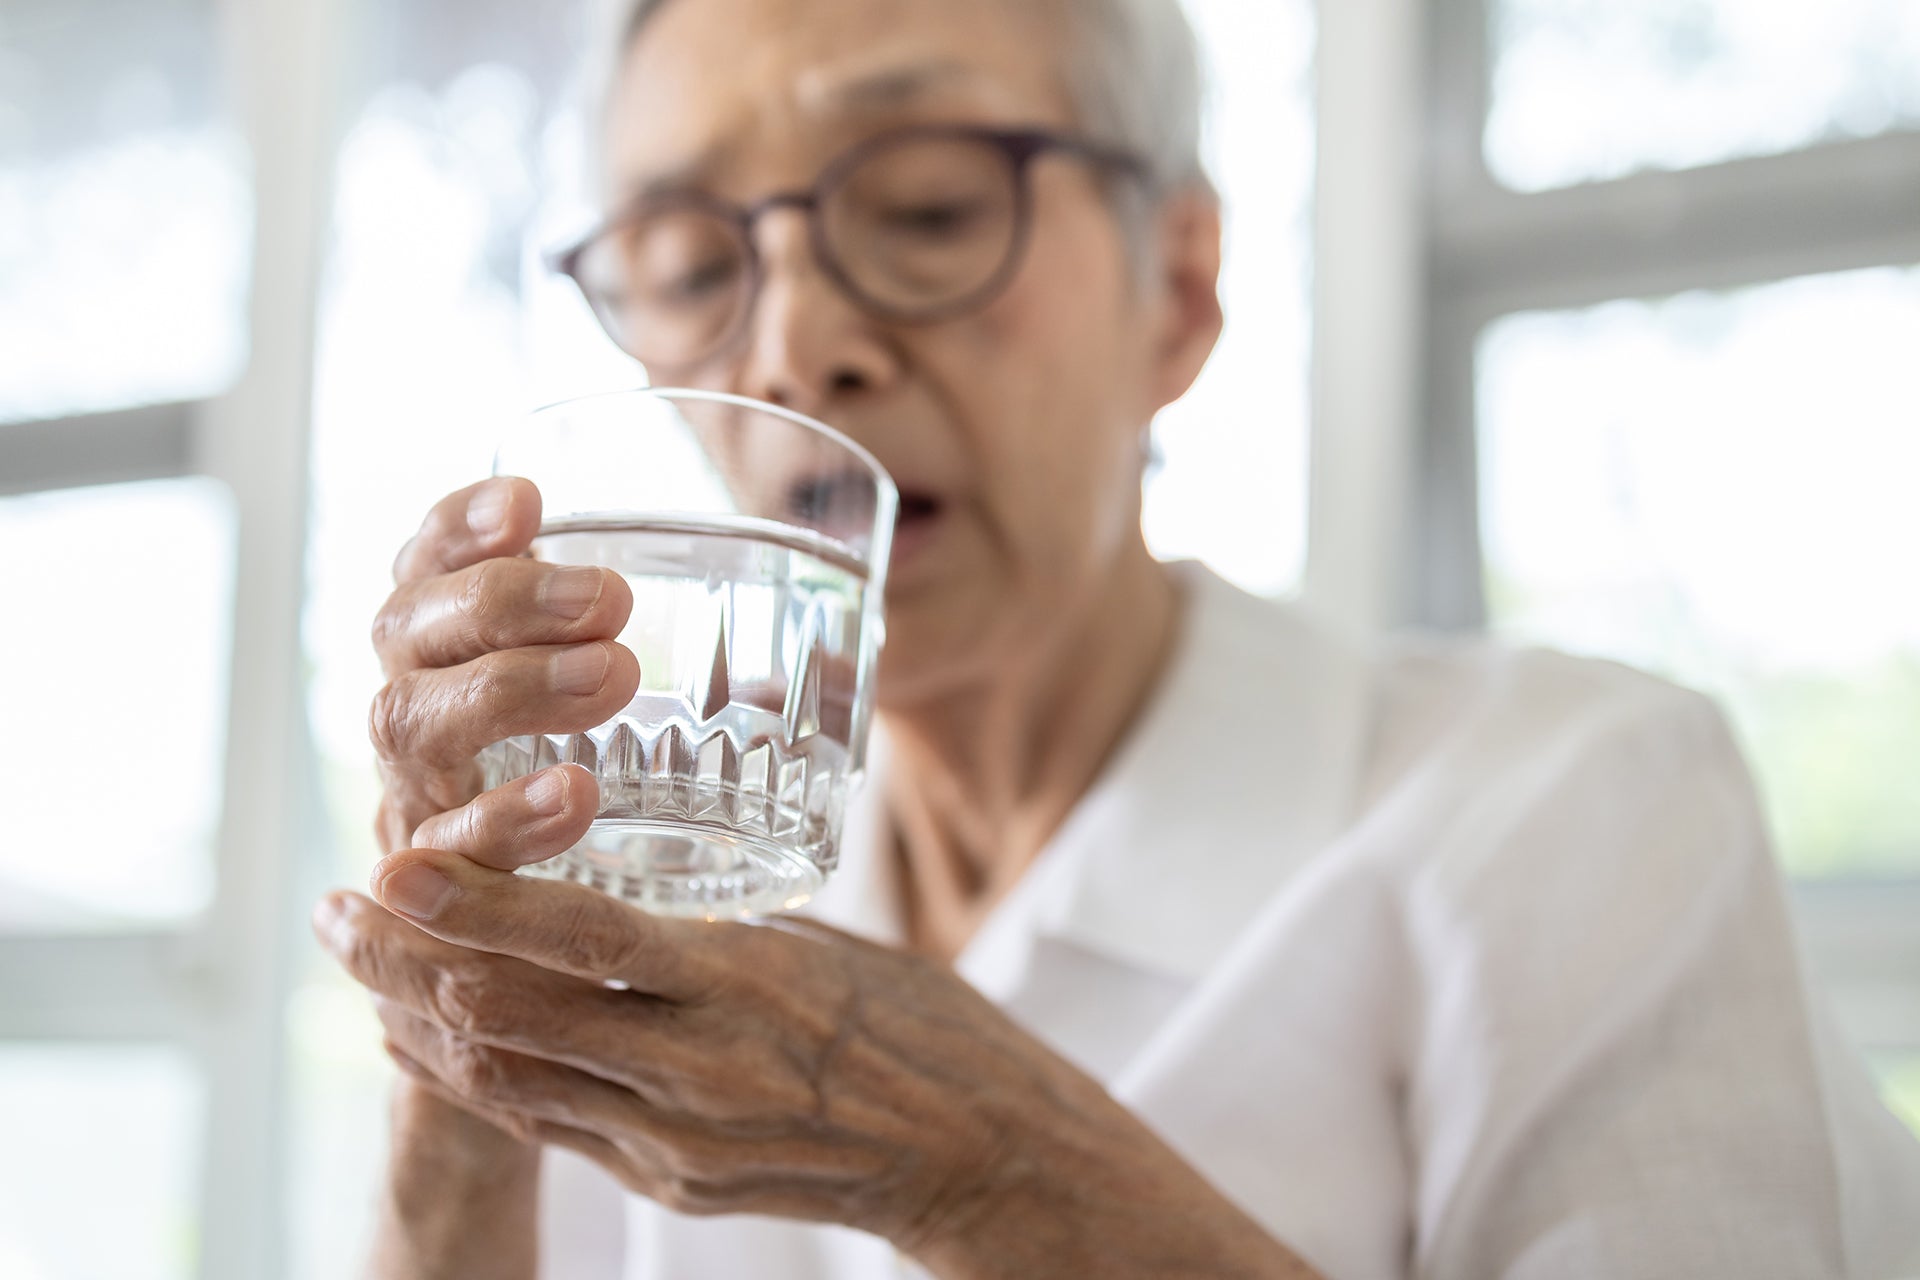  Elderly woman having difficulty drinking water due to her Parkinson's tremors.